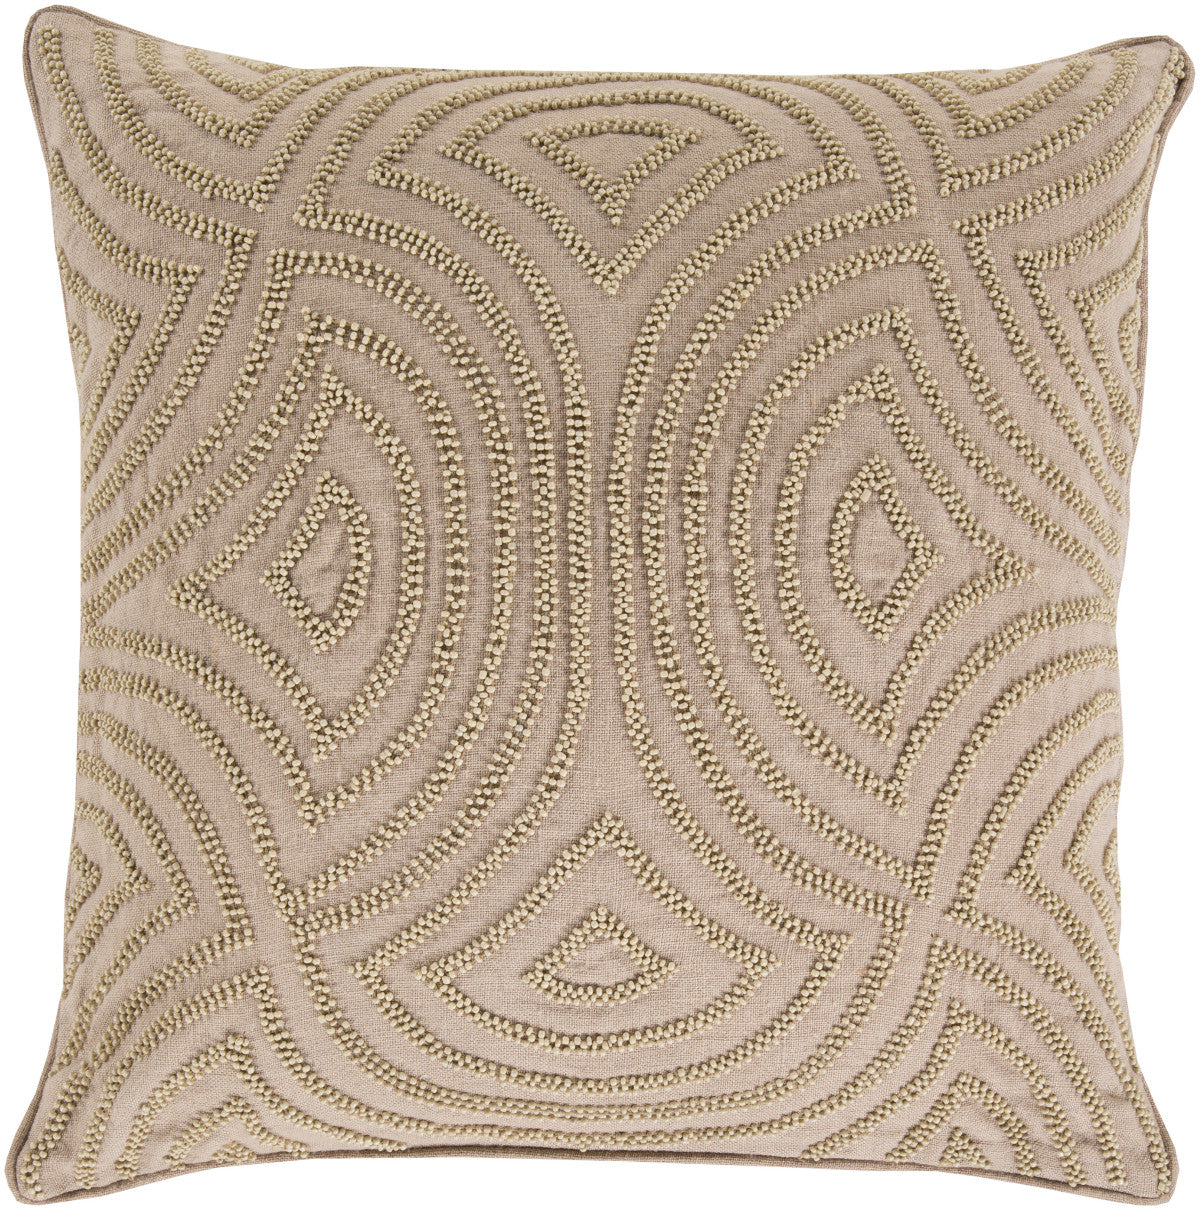 Surya Skinny Dip Linen and Beads SKD-004 Pillow by Candice Olson